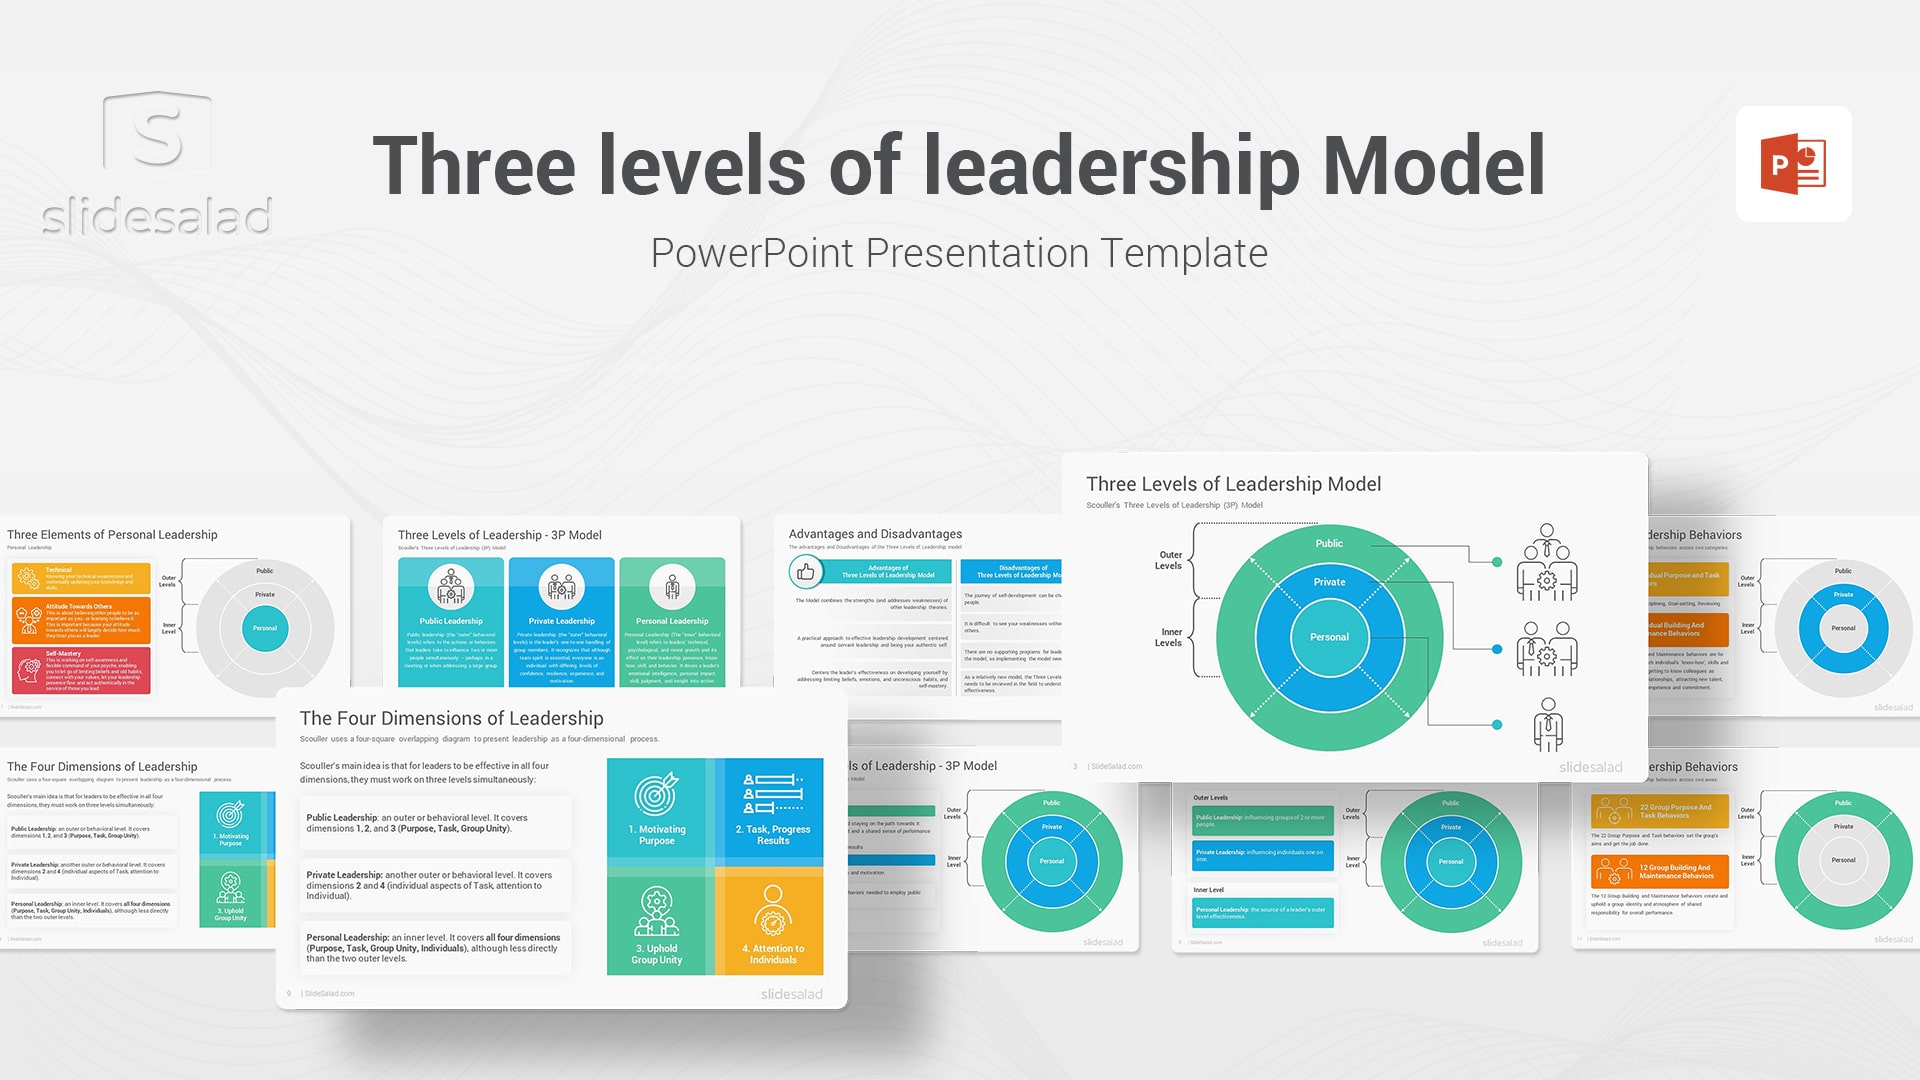 Three levels of leadership Model PowerPoint Template - Stunning Leadership PPT Themes for Leaders